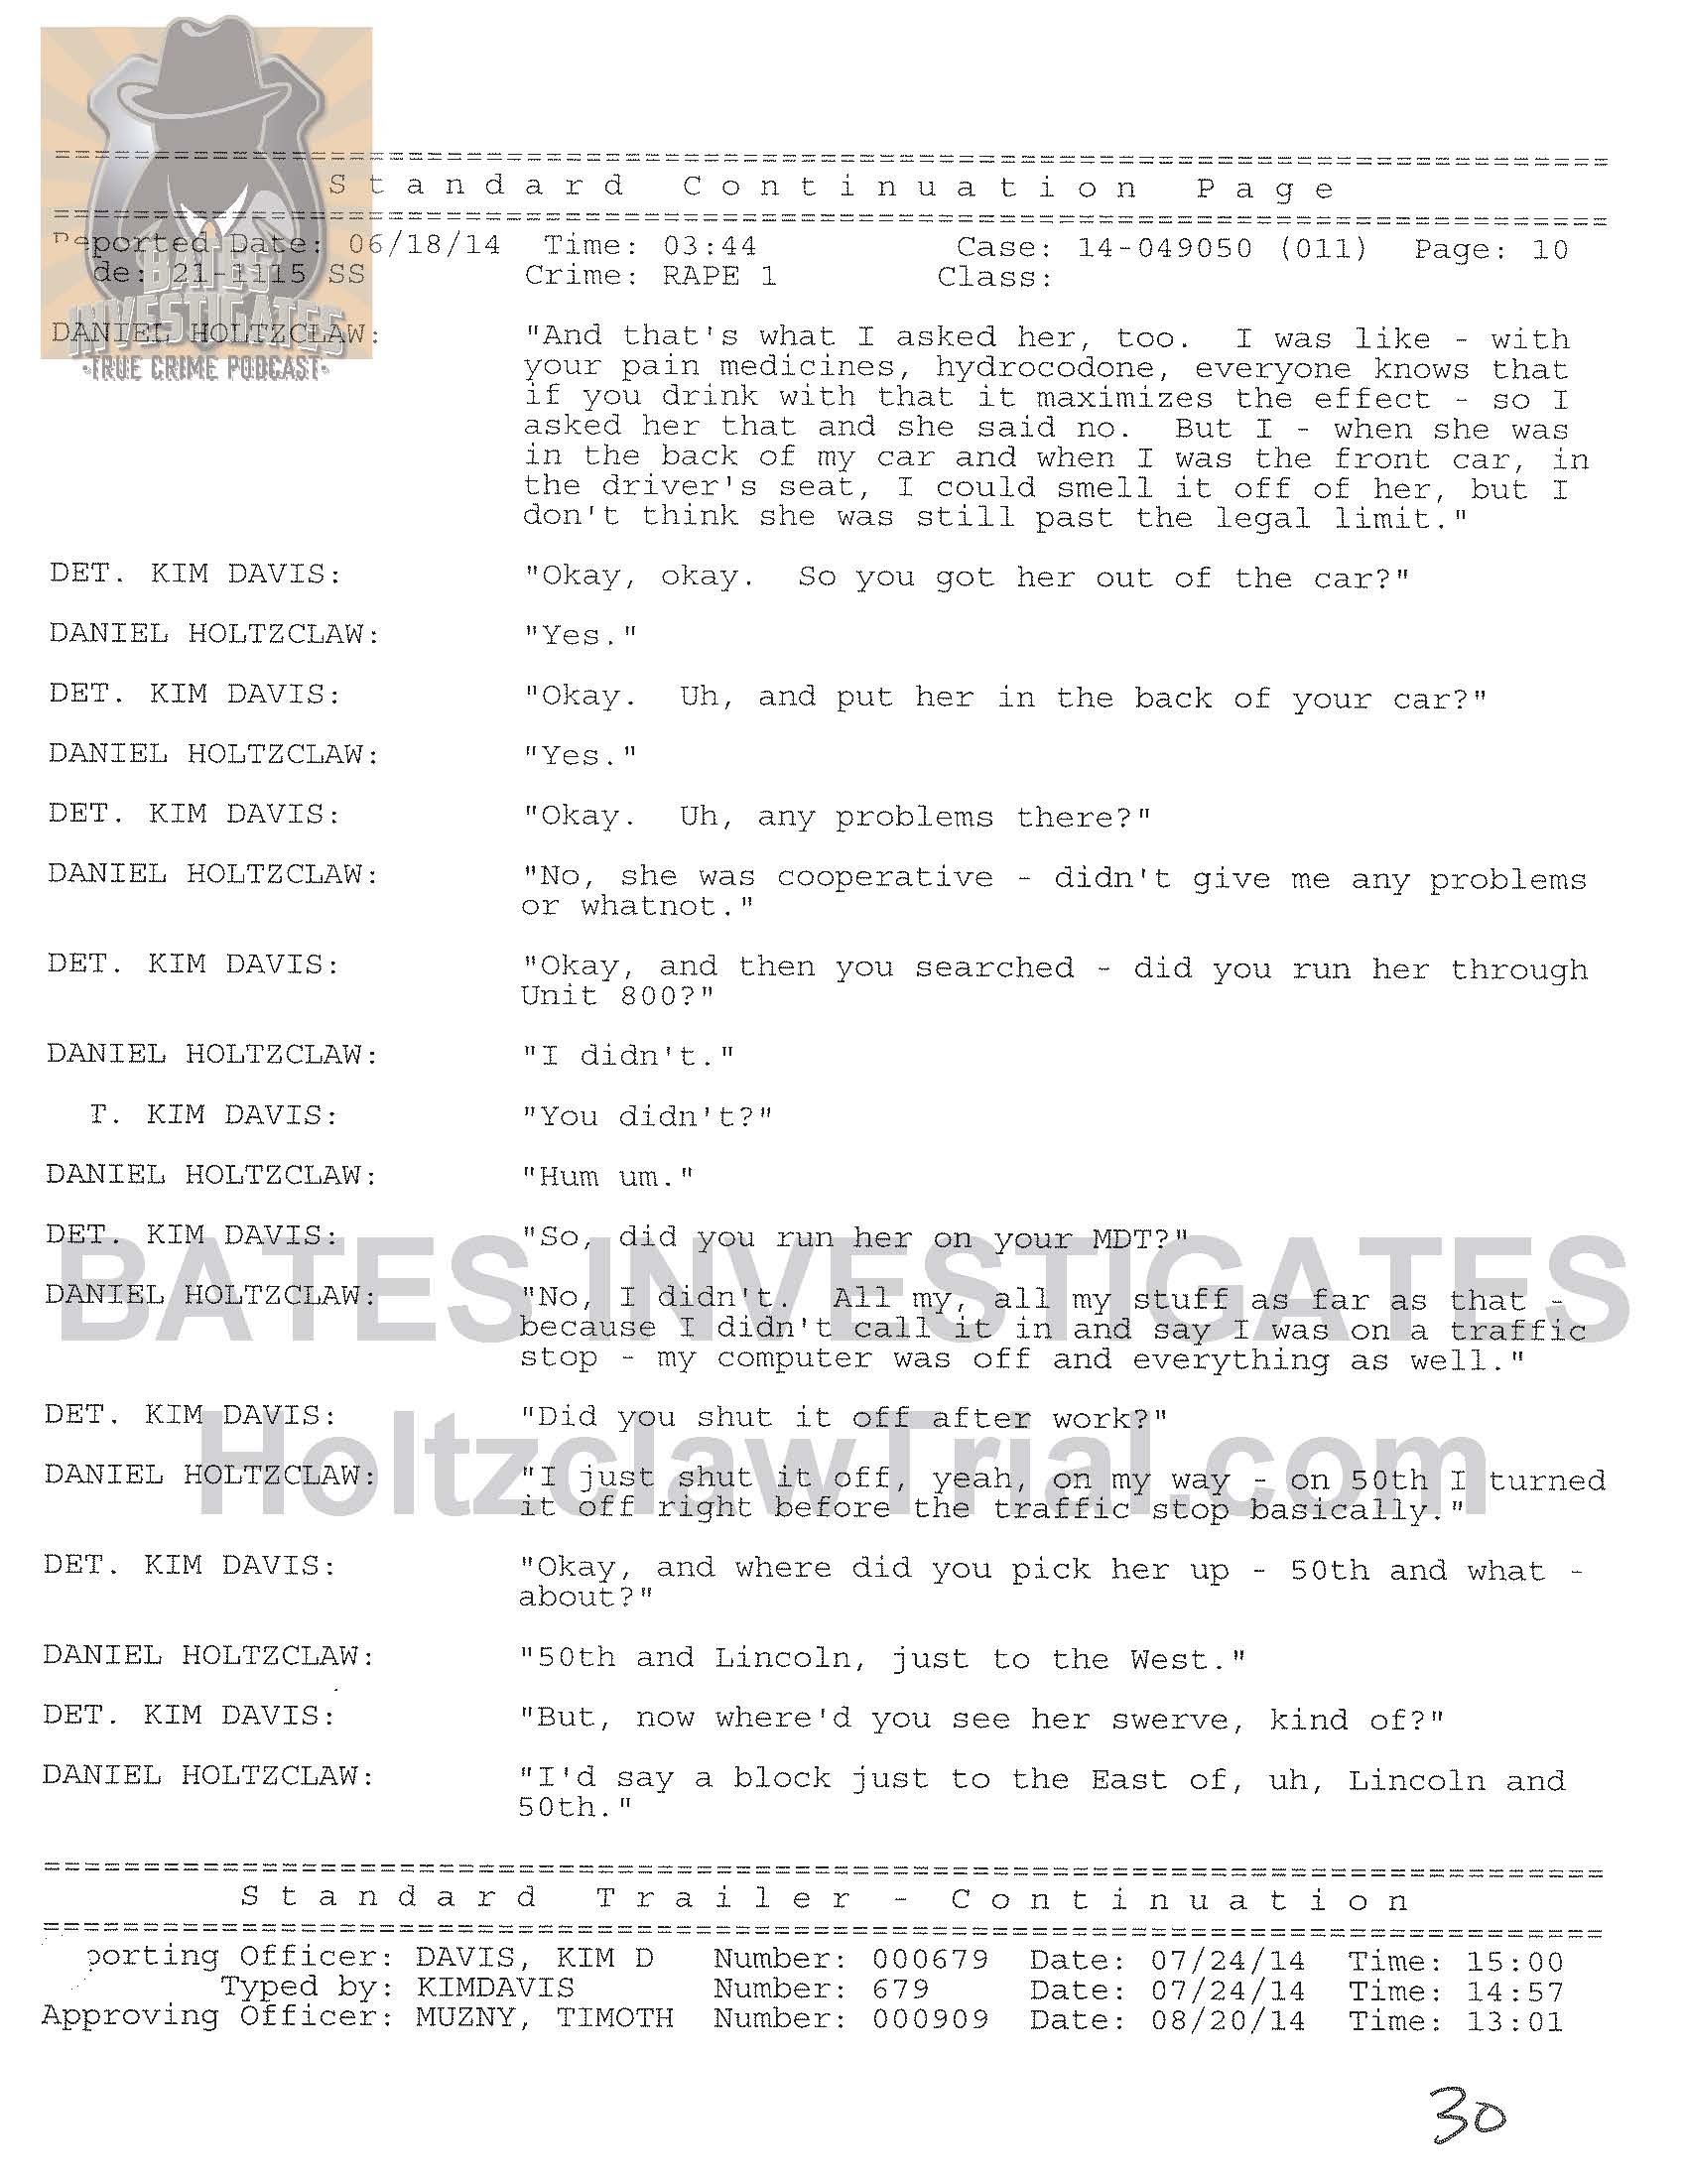 Holtzclaw Interrogation Transcript - Ep02 Redacted_Page_10.jpg